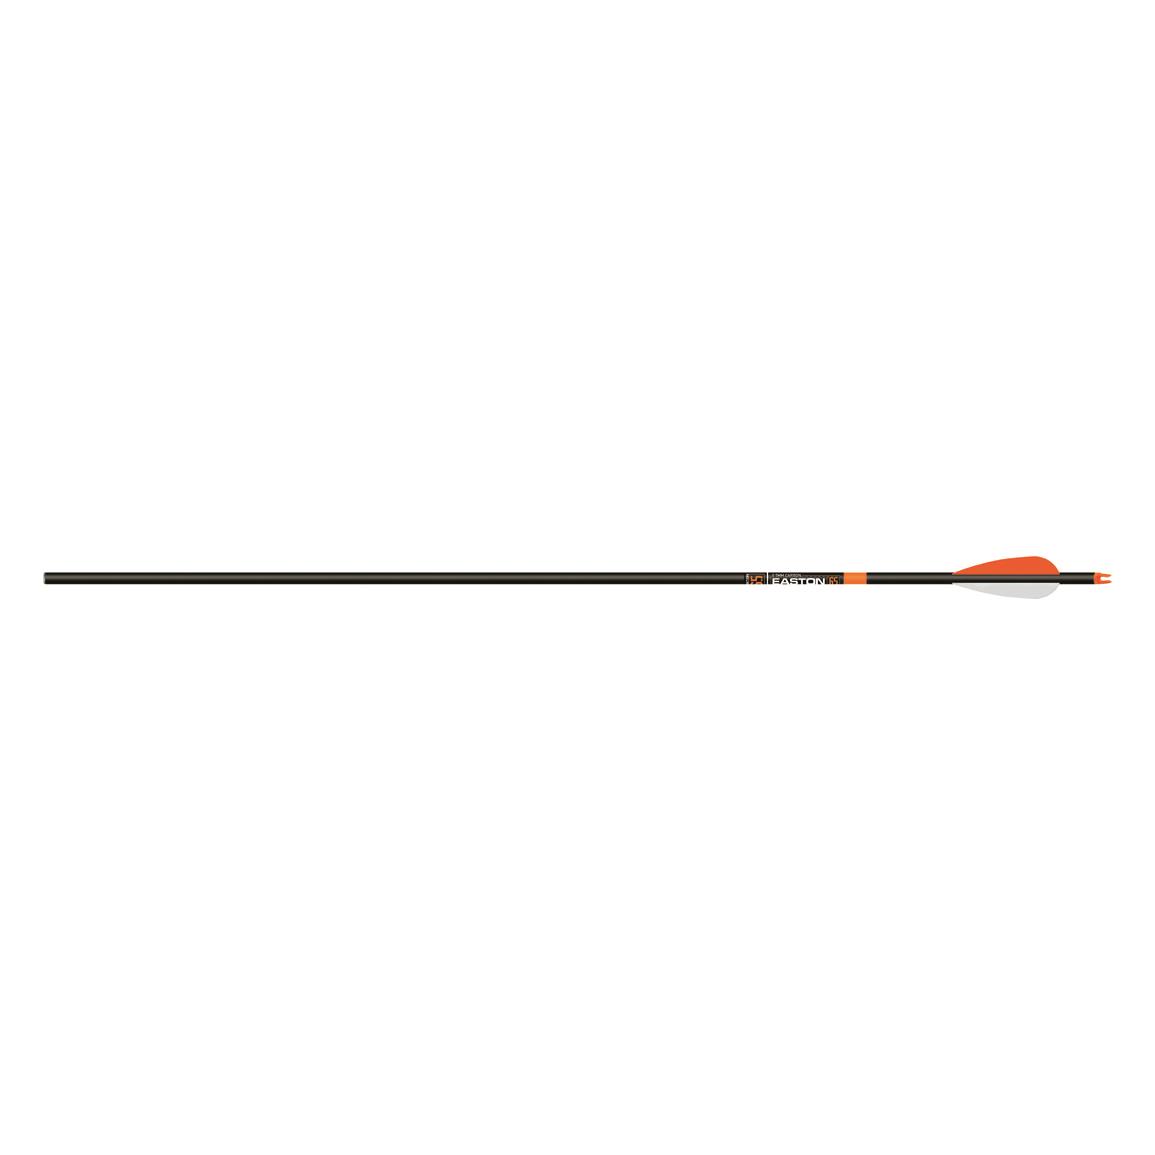 Easton 6.5 Acu-Carbon Ready to Shoot Junior Arrows, 6 Pack